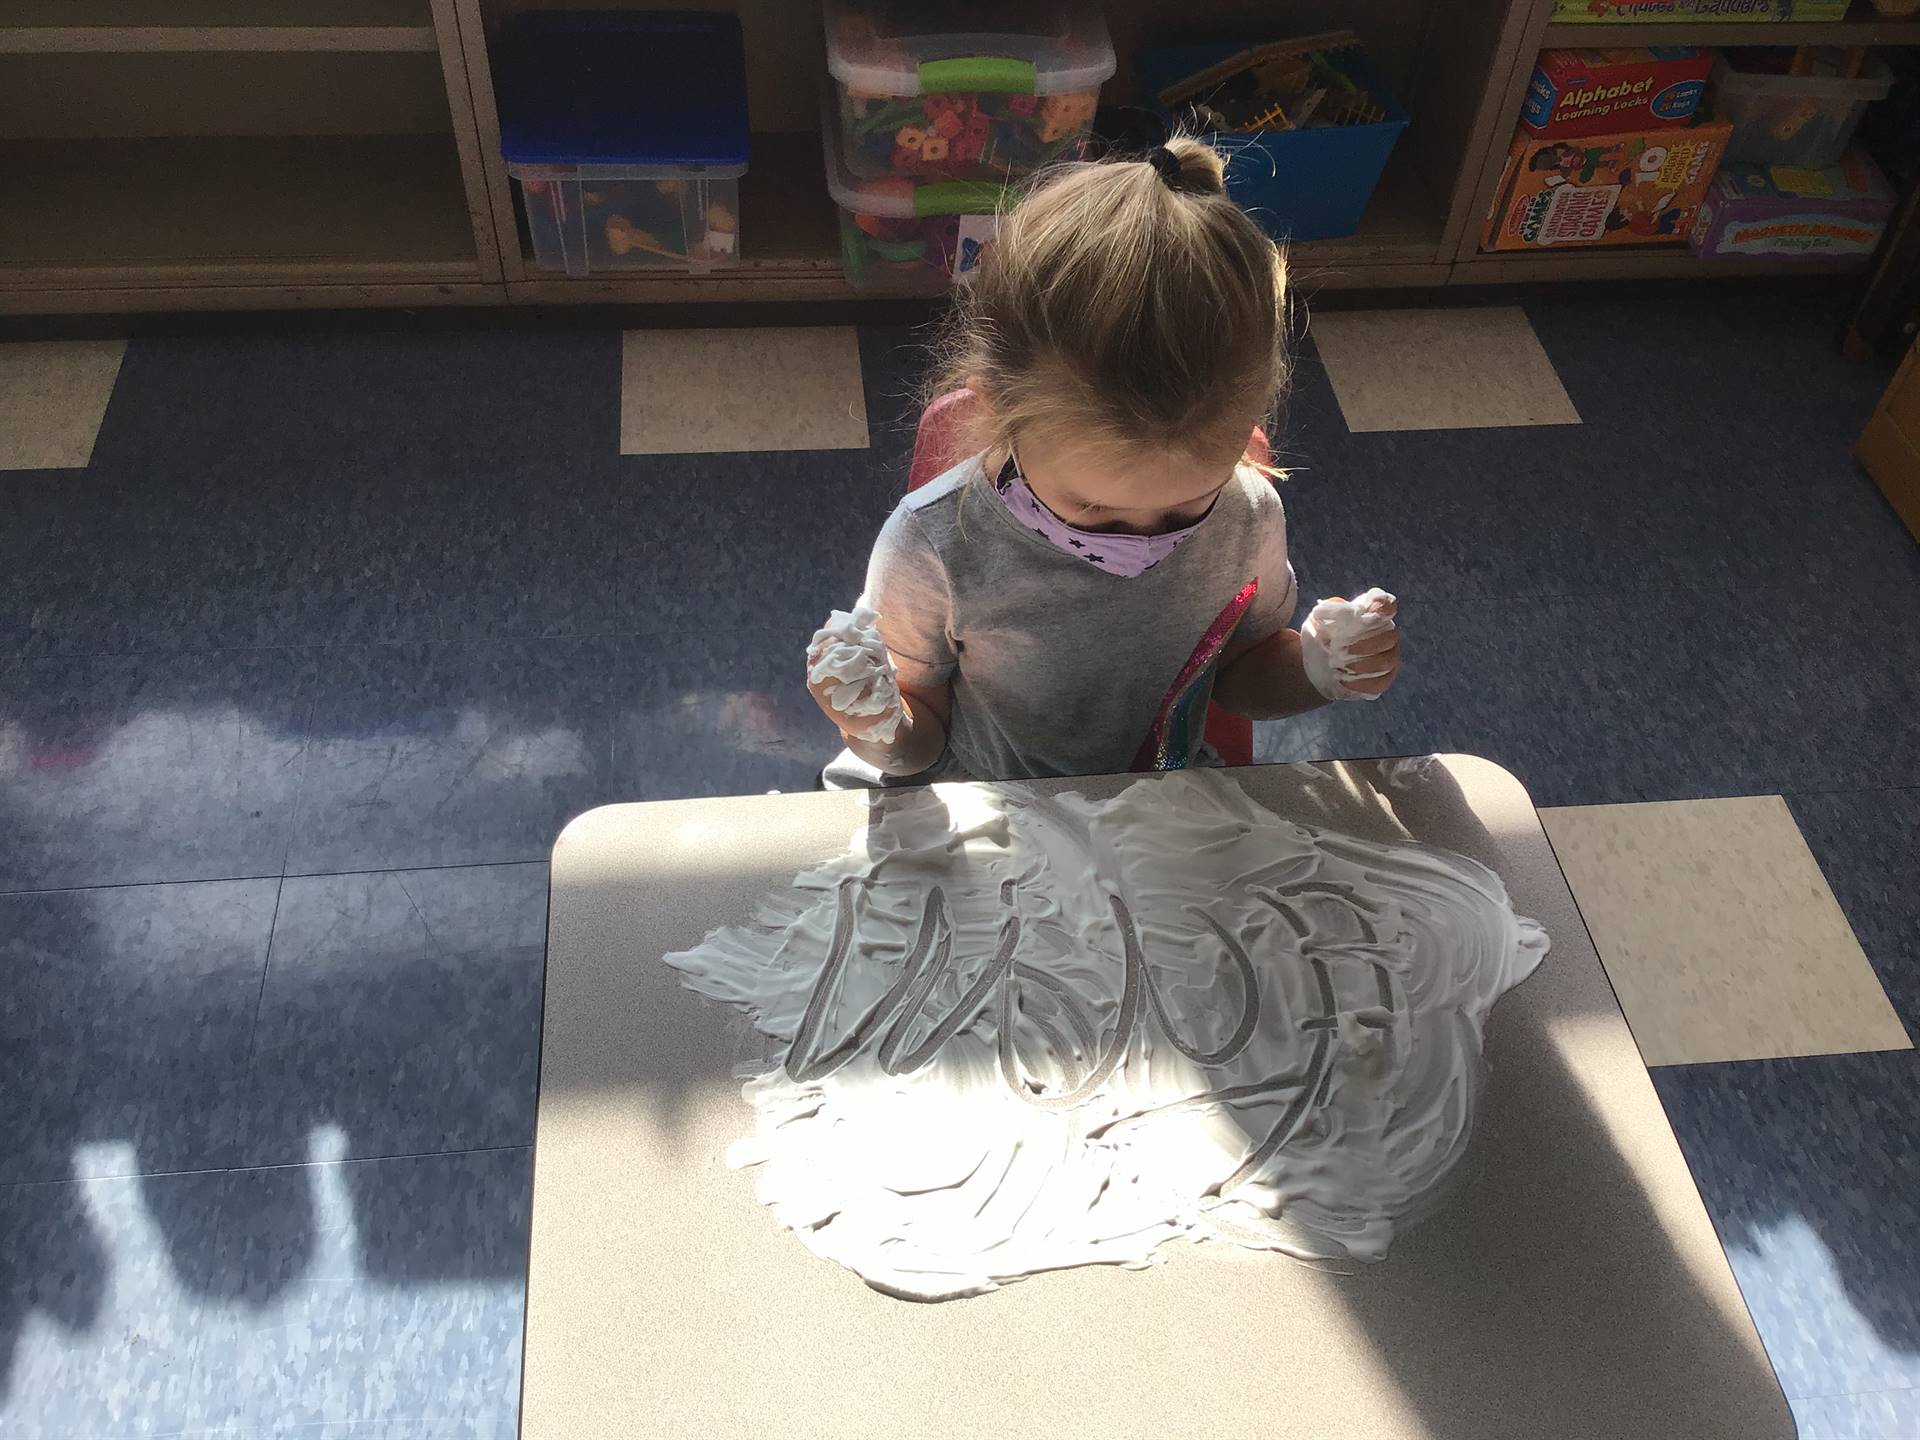 A student draws an angry face in shaving cream.